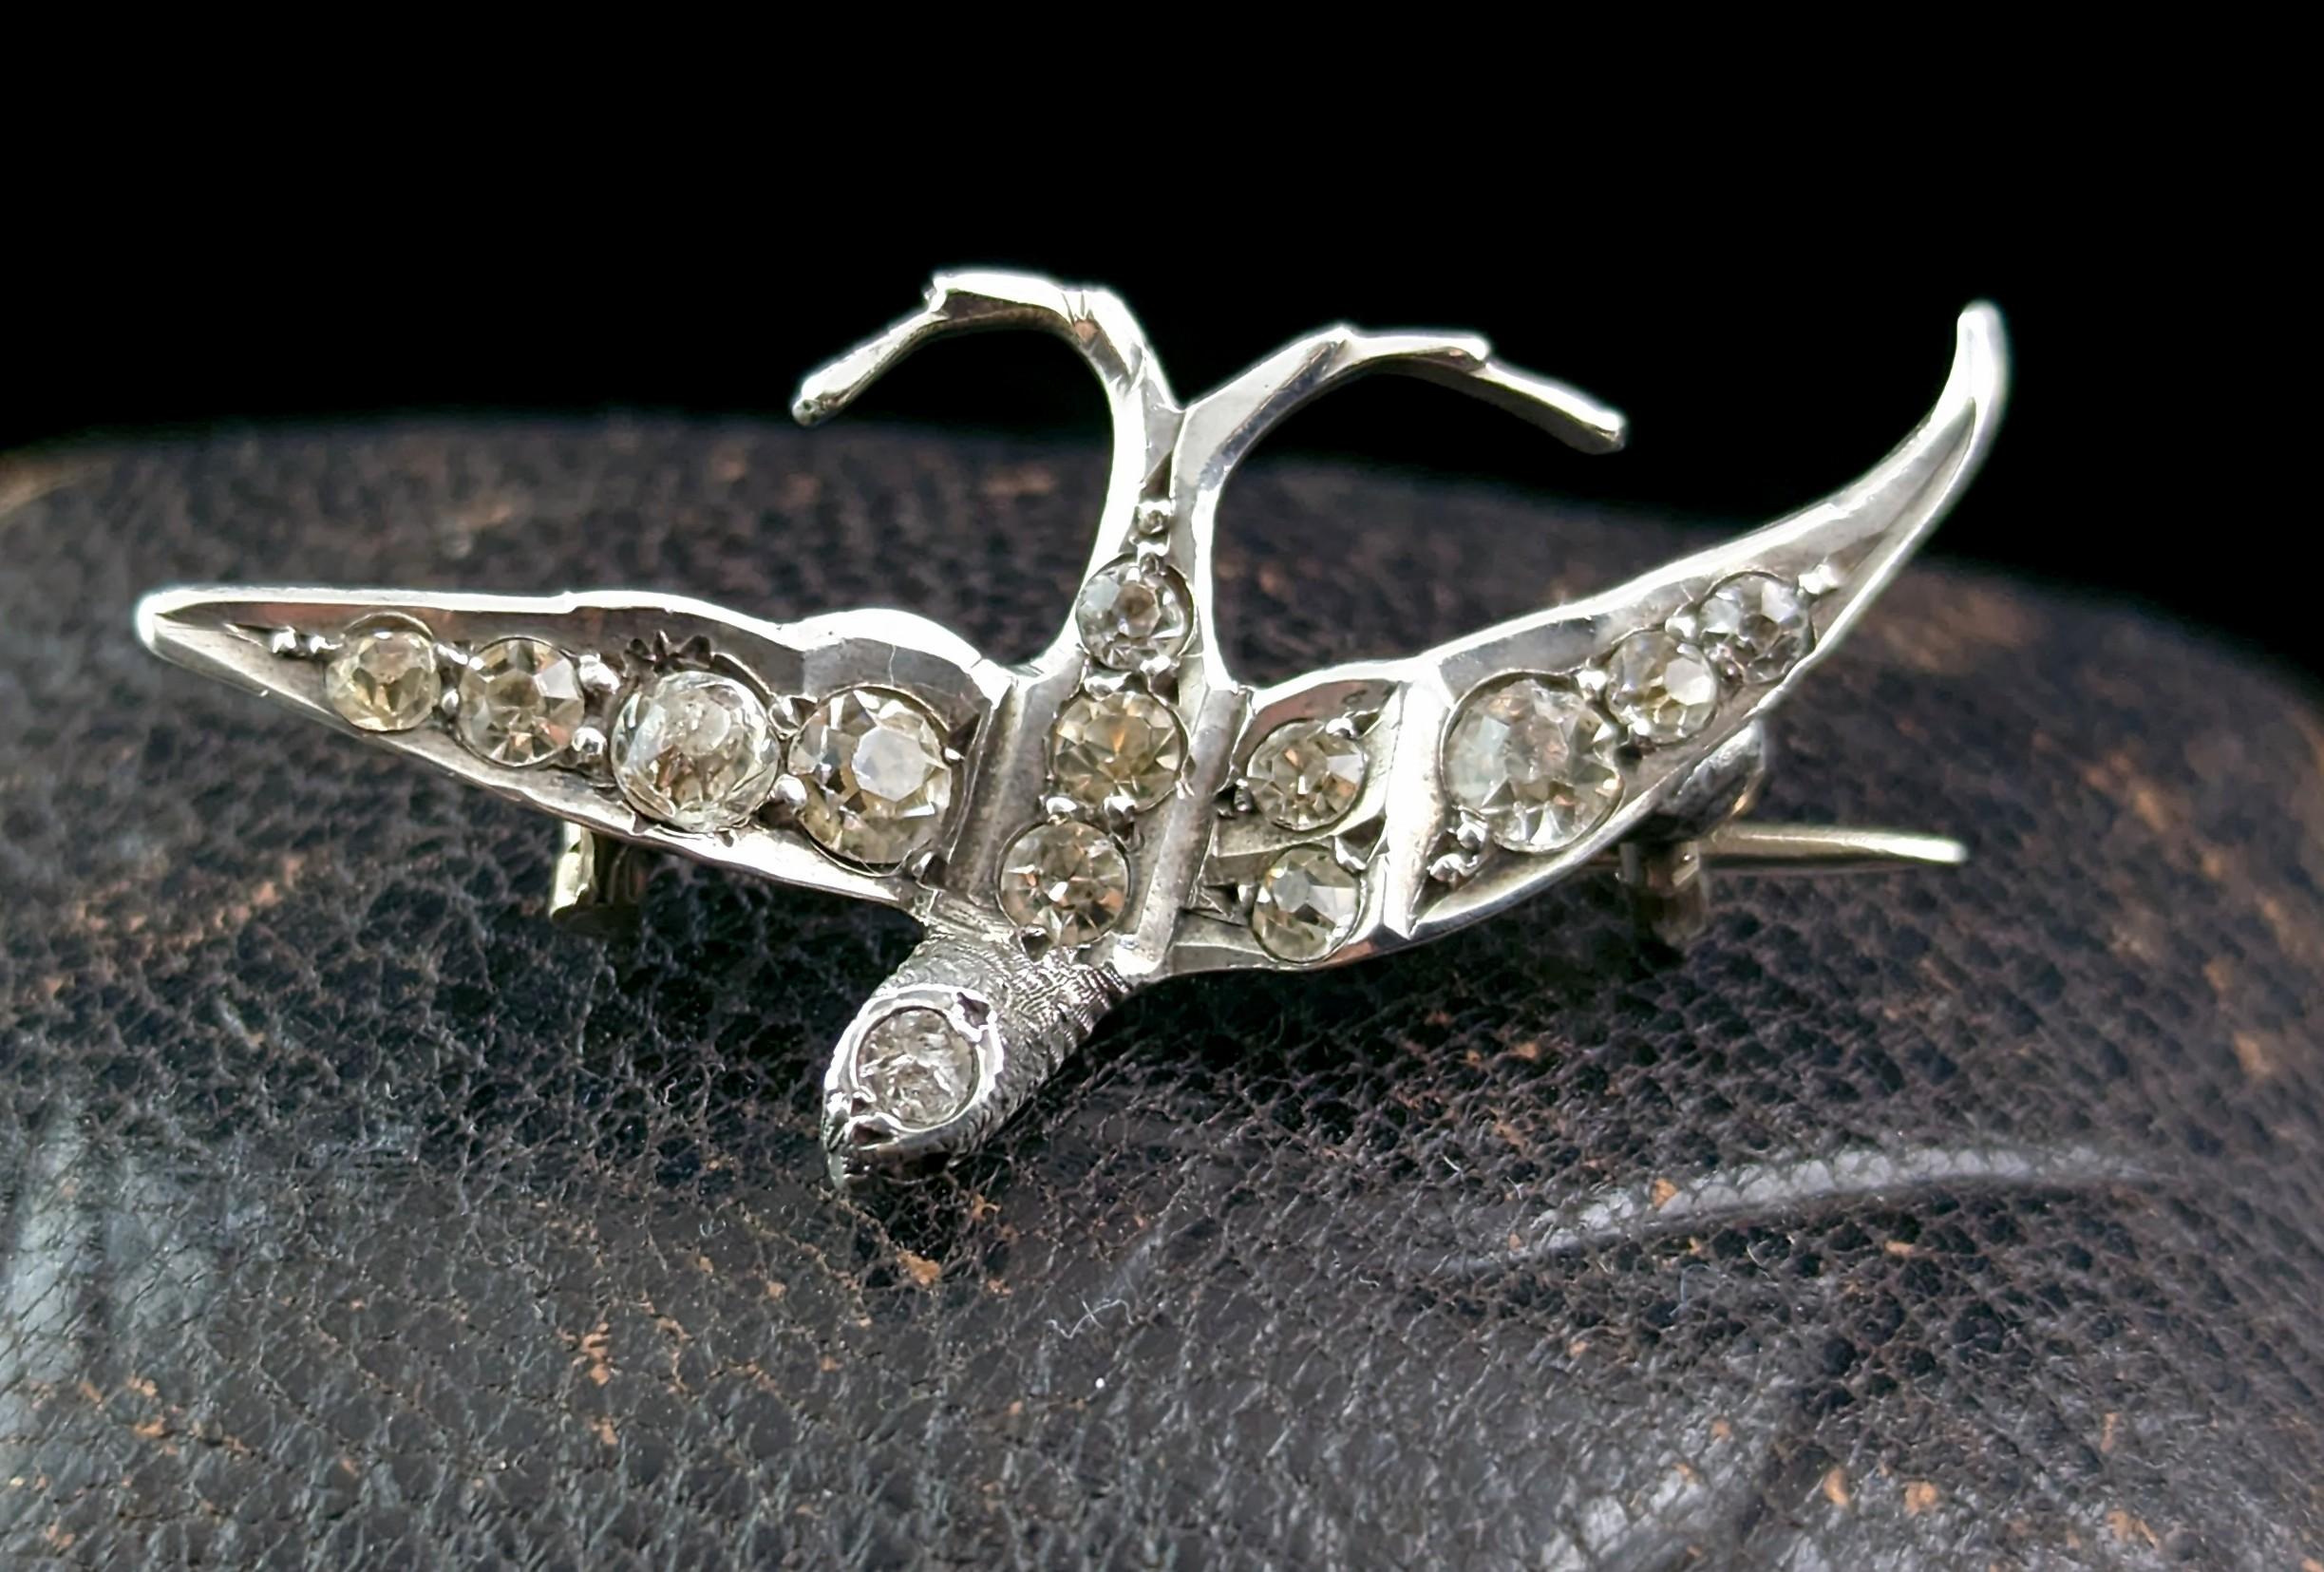 A sweet antique Victorian era sterling silver and paste swallow brooch.

The brooch is made from cool silver and is adorned all over with twinkling clear paste stones with a ruby coloured paste eye.

The swallow was steeped in symbolism in the